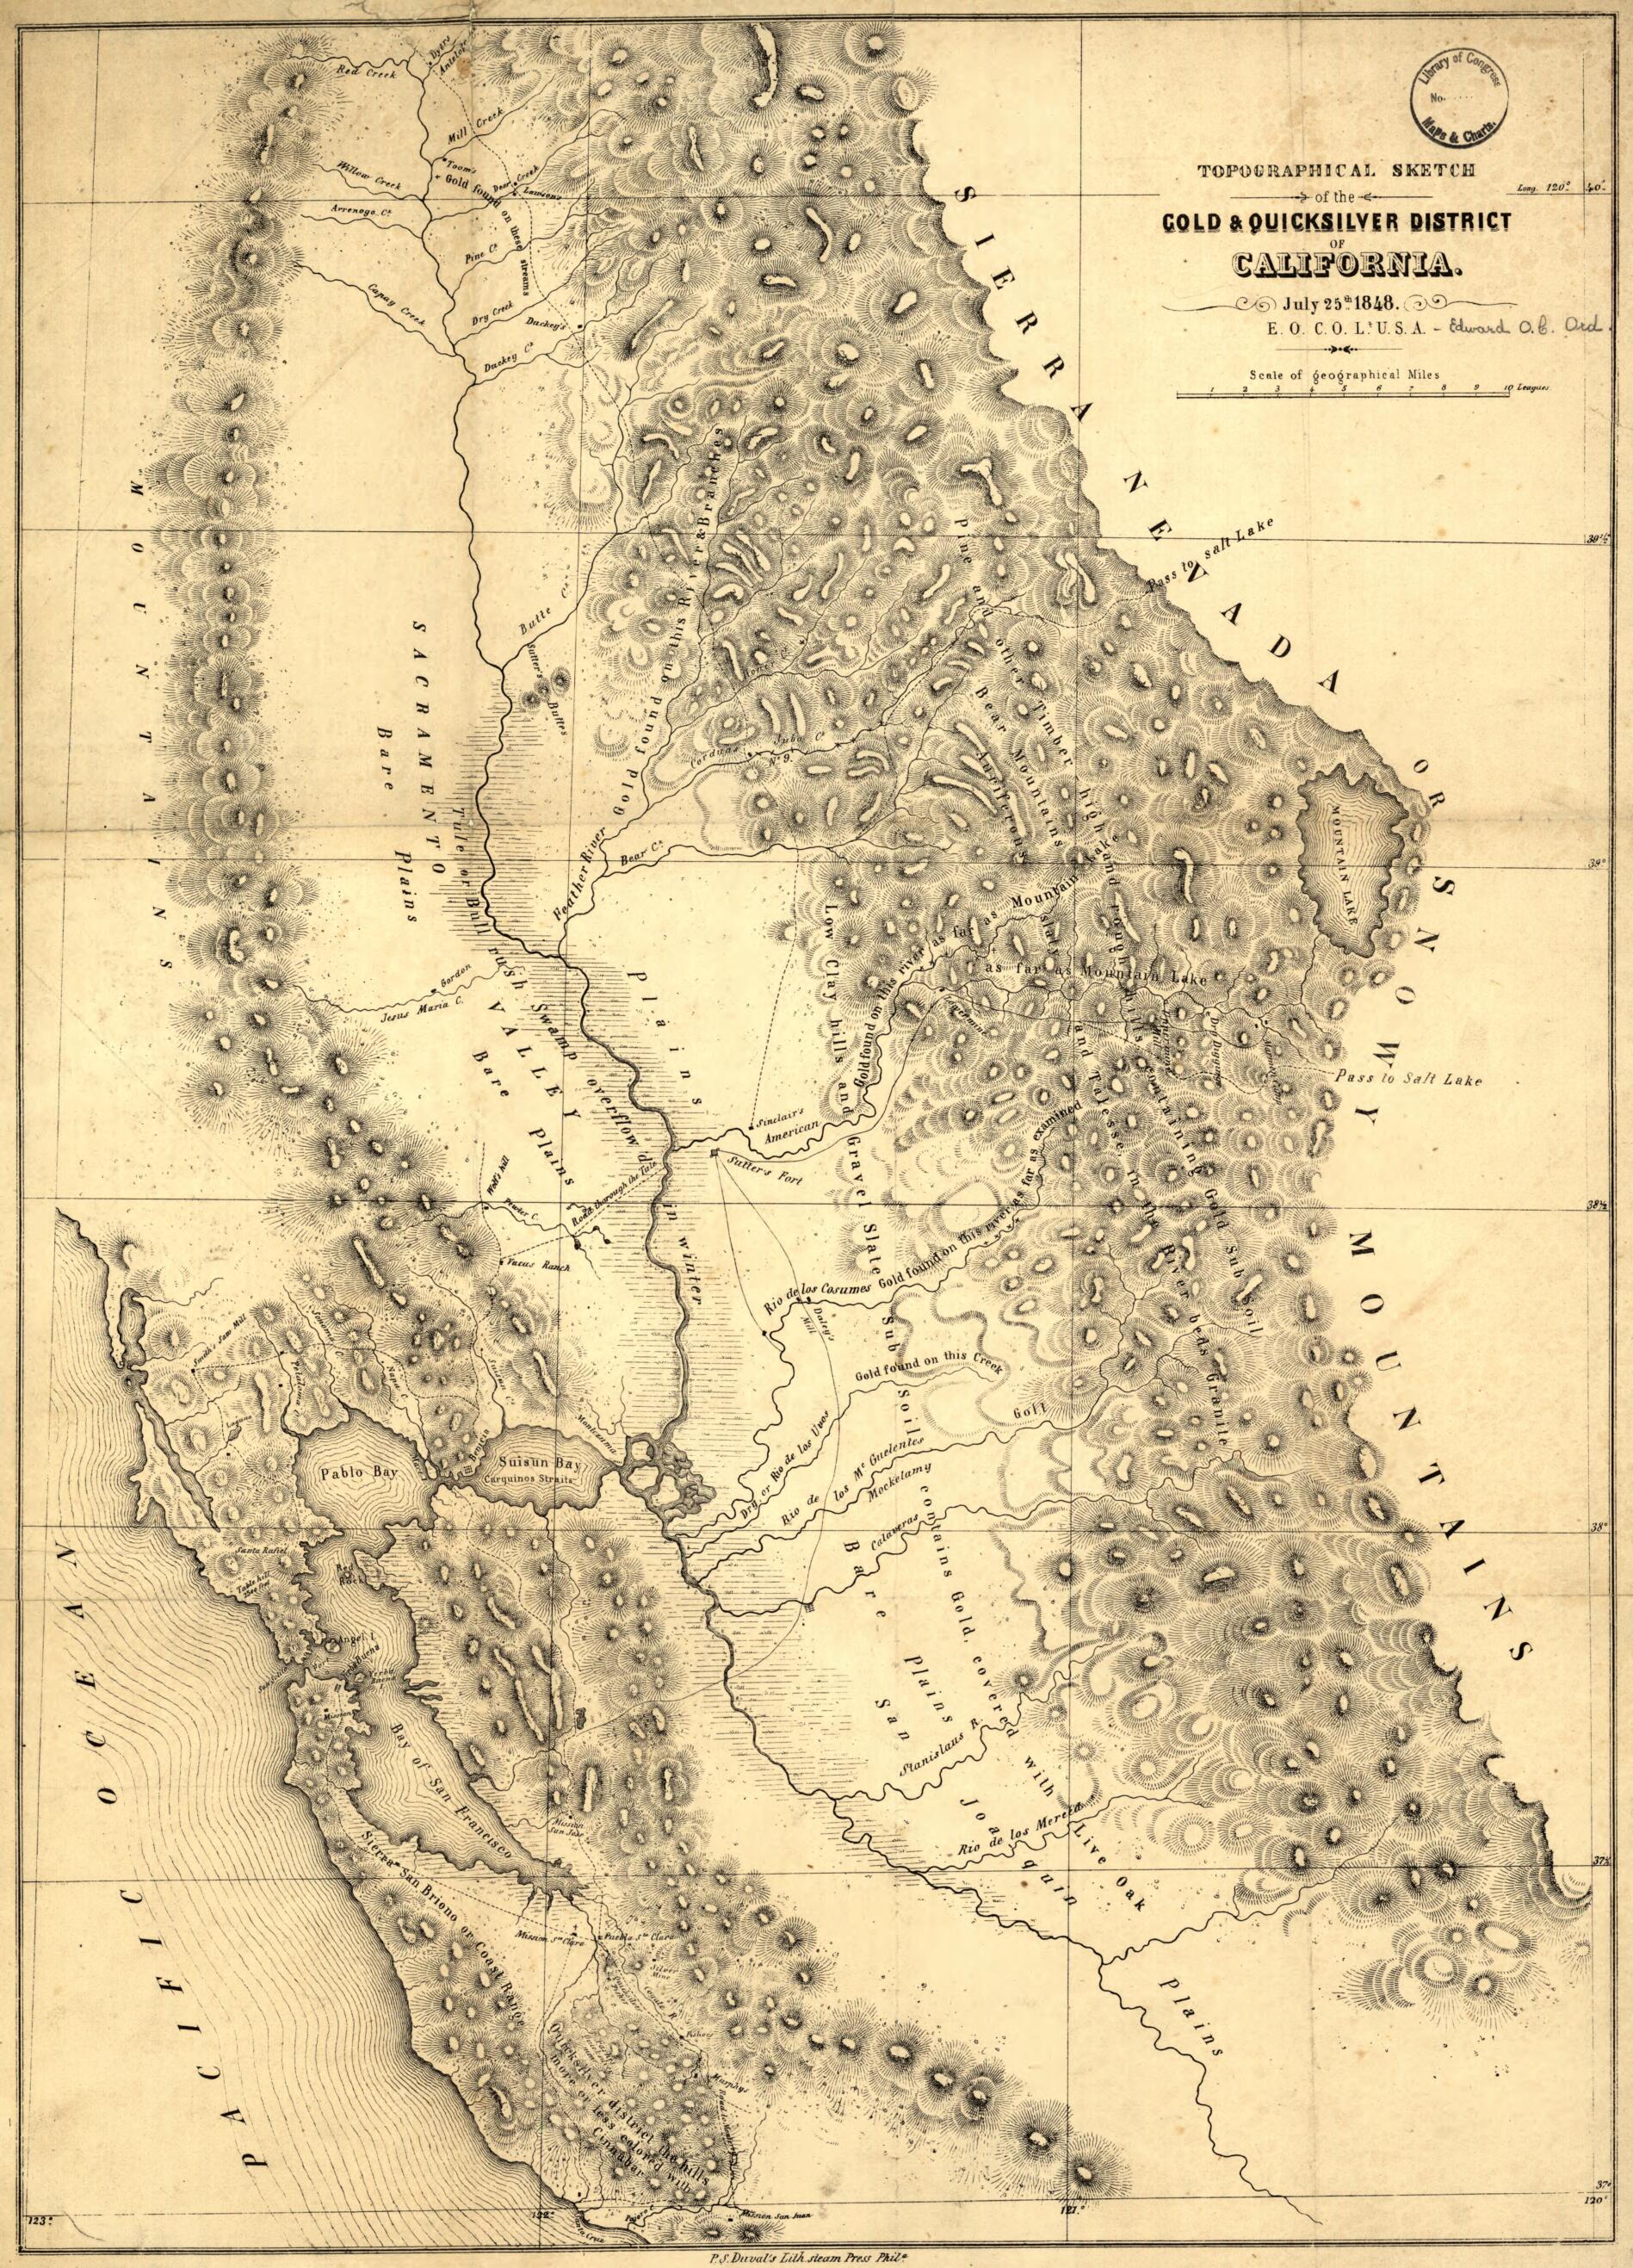 This old map of Topographical Sketch of the Gold &amp; Quicksilver District of California from 1848 was created by Edward Otho Cresap Ord in 1848